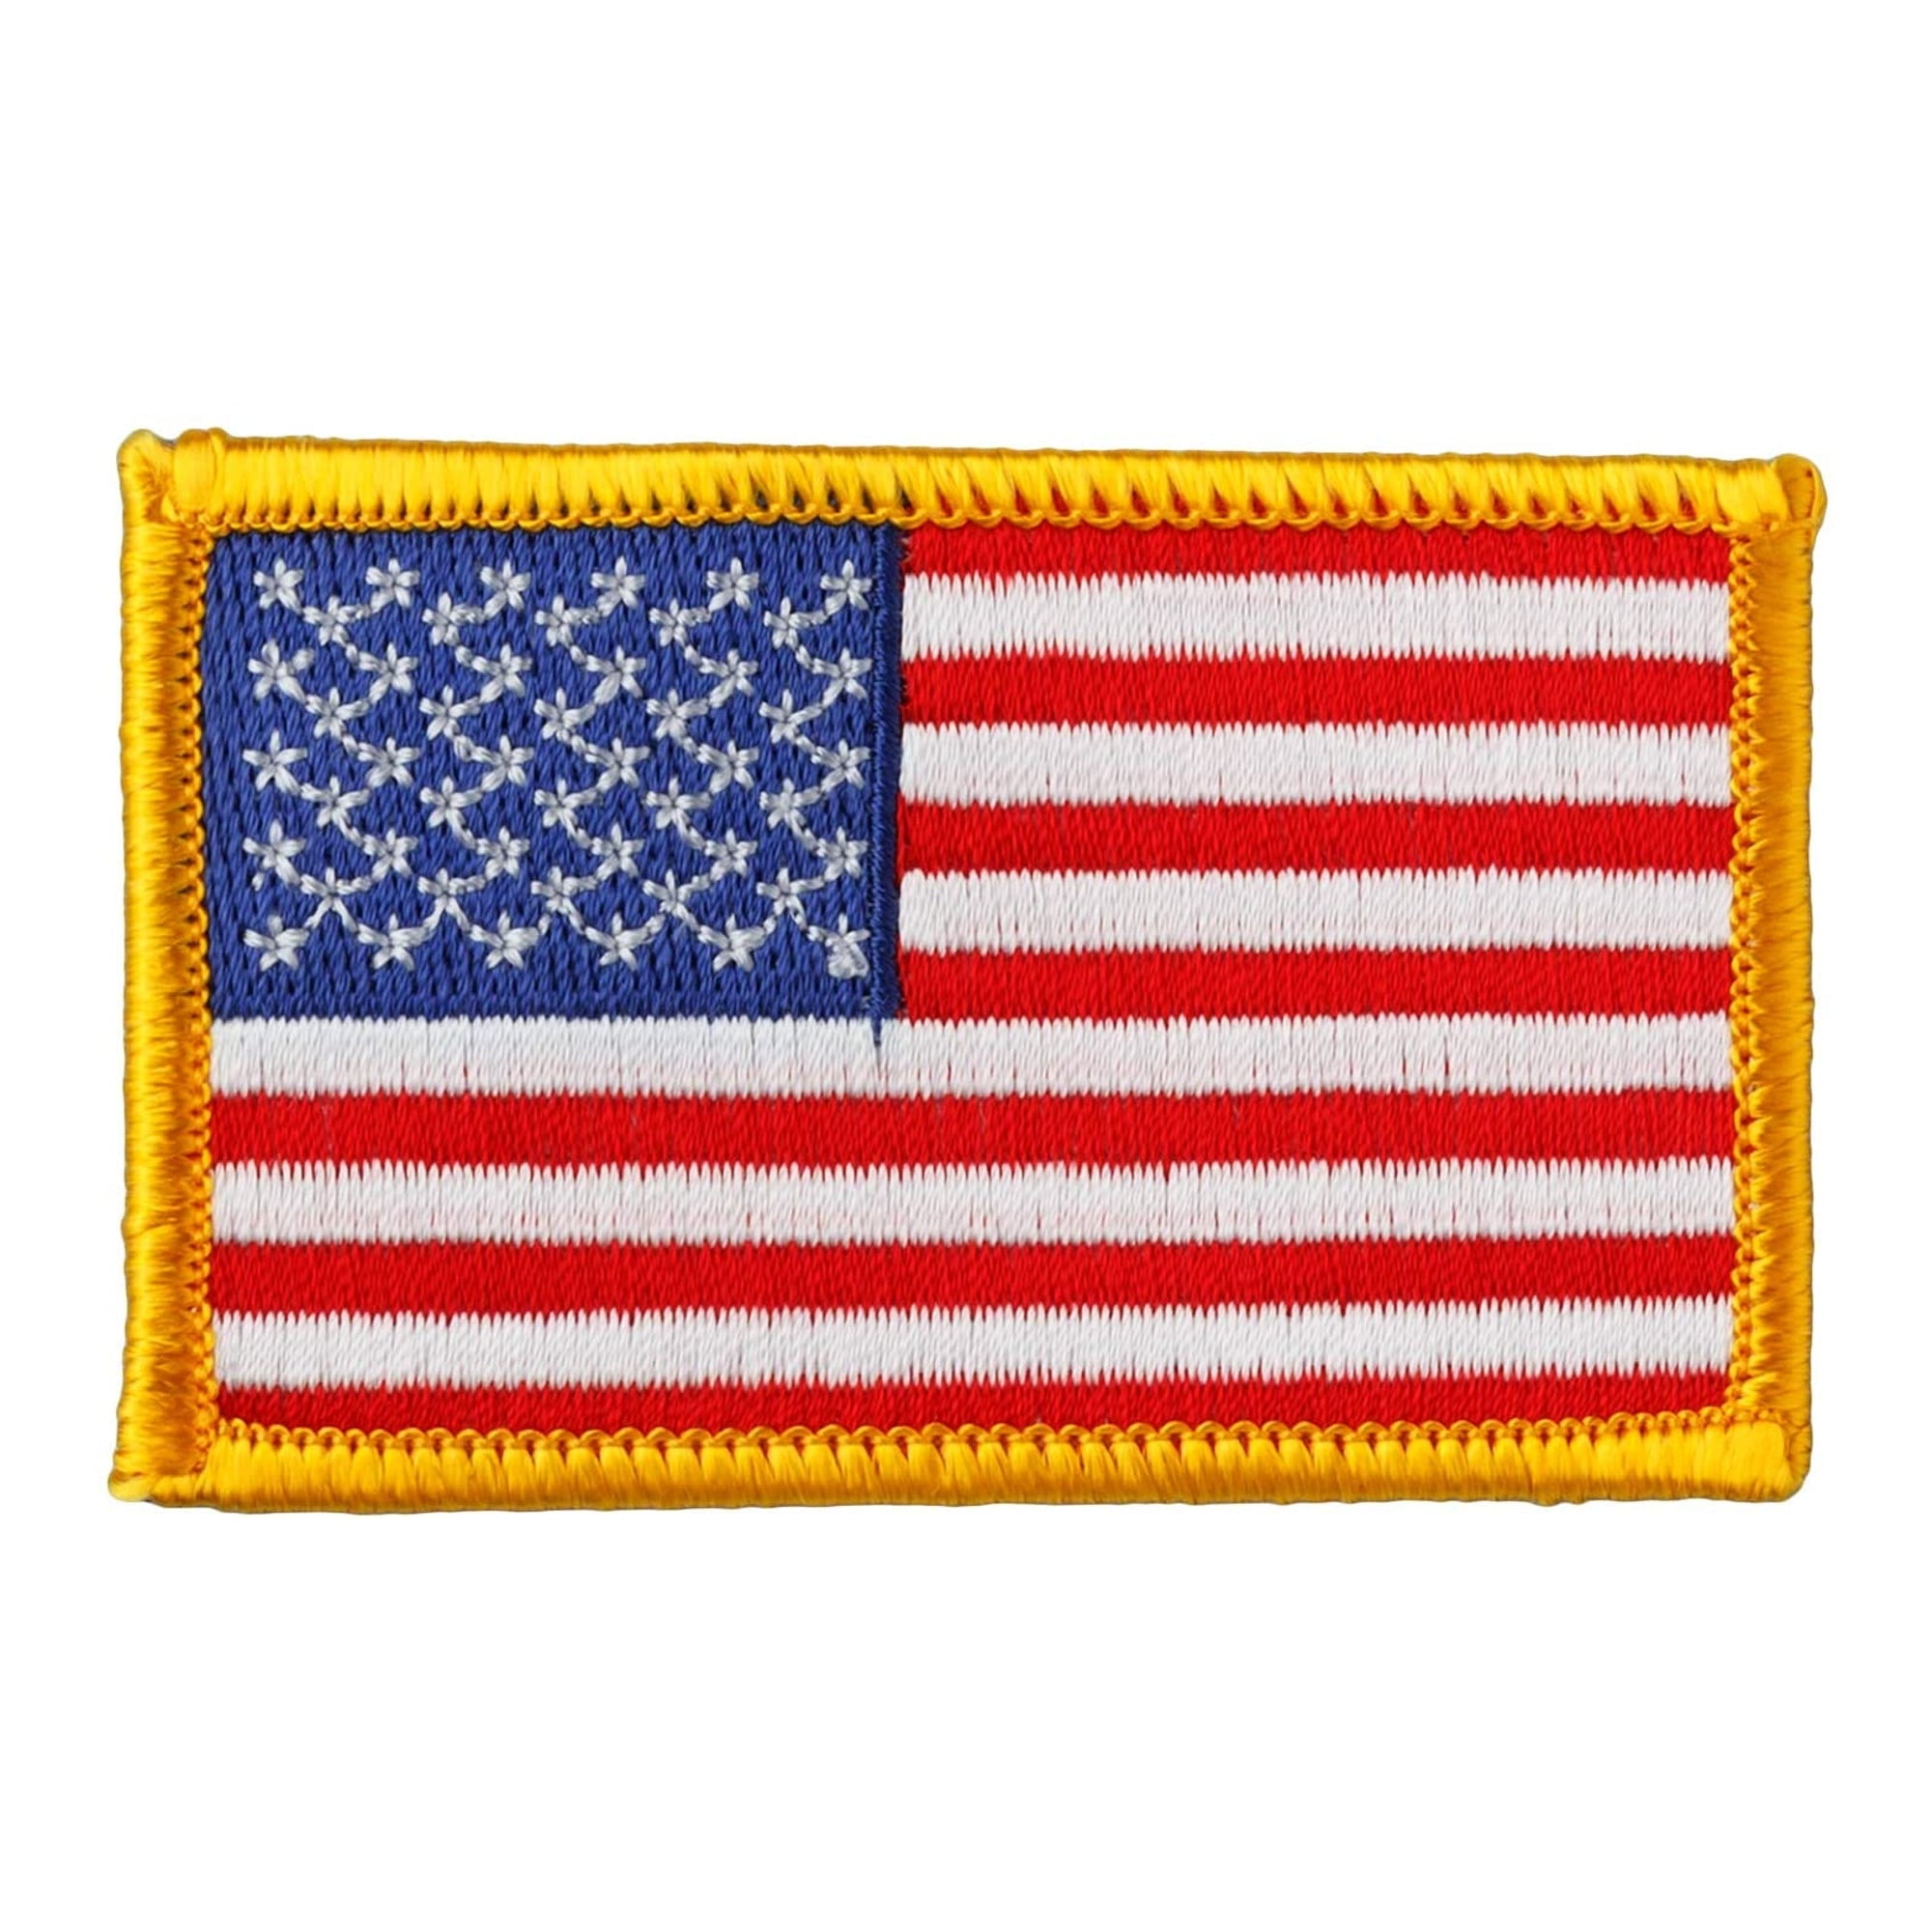 AMERICAN FLAG EMBROIDERED PATCH iron-on GOLD WAVING USA applique UNITED STATES 